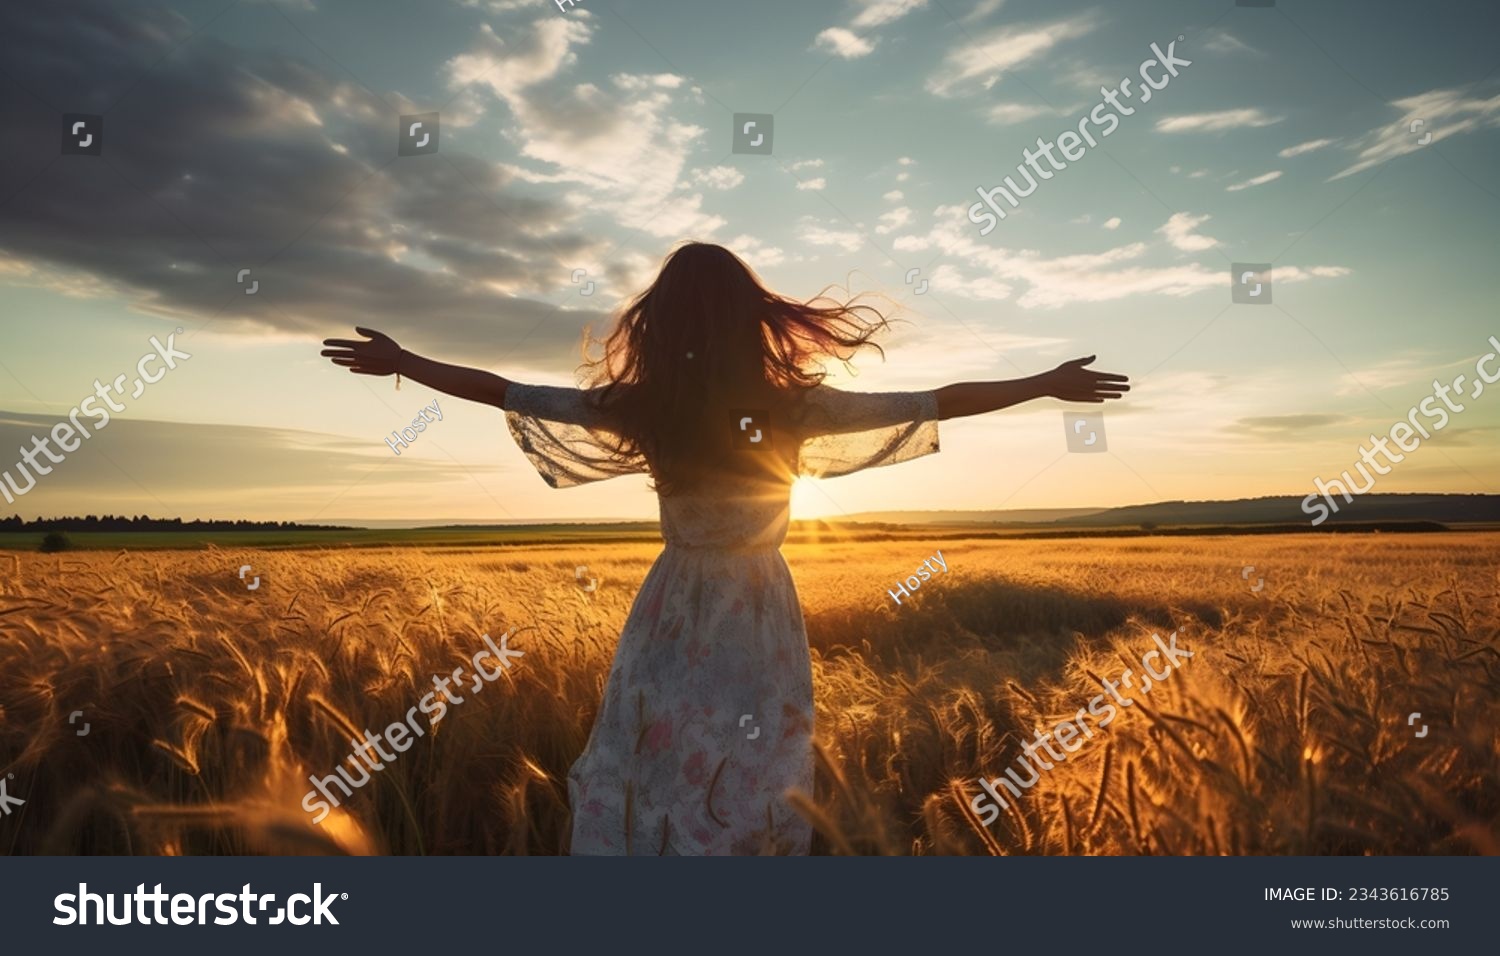 Girl at sunset with outstretched arms on a field with grain #2343616785